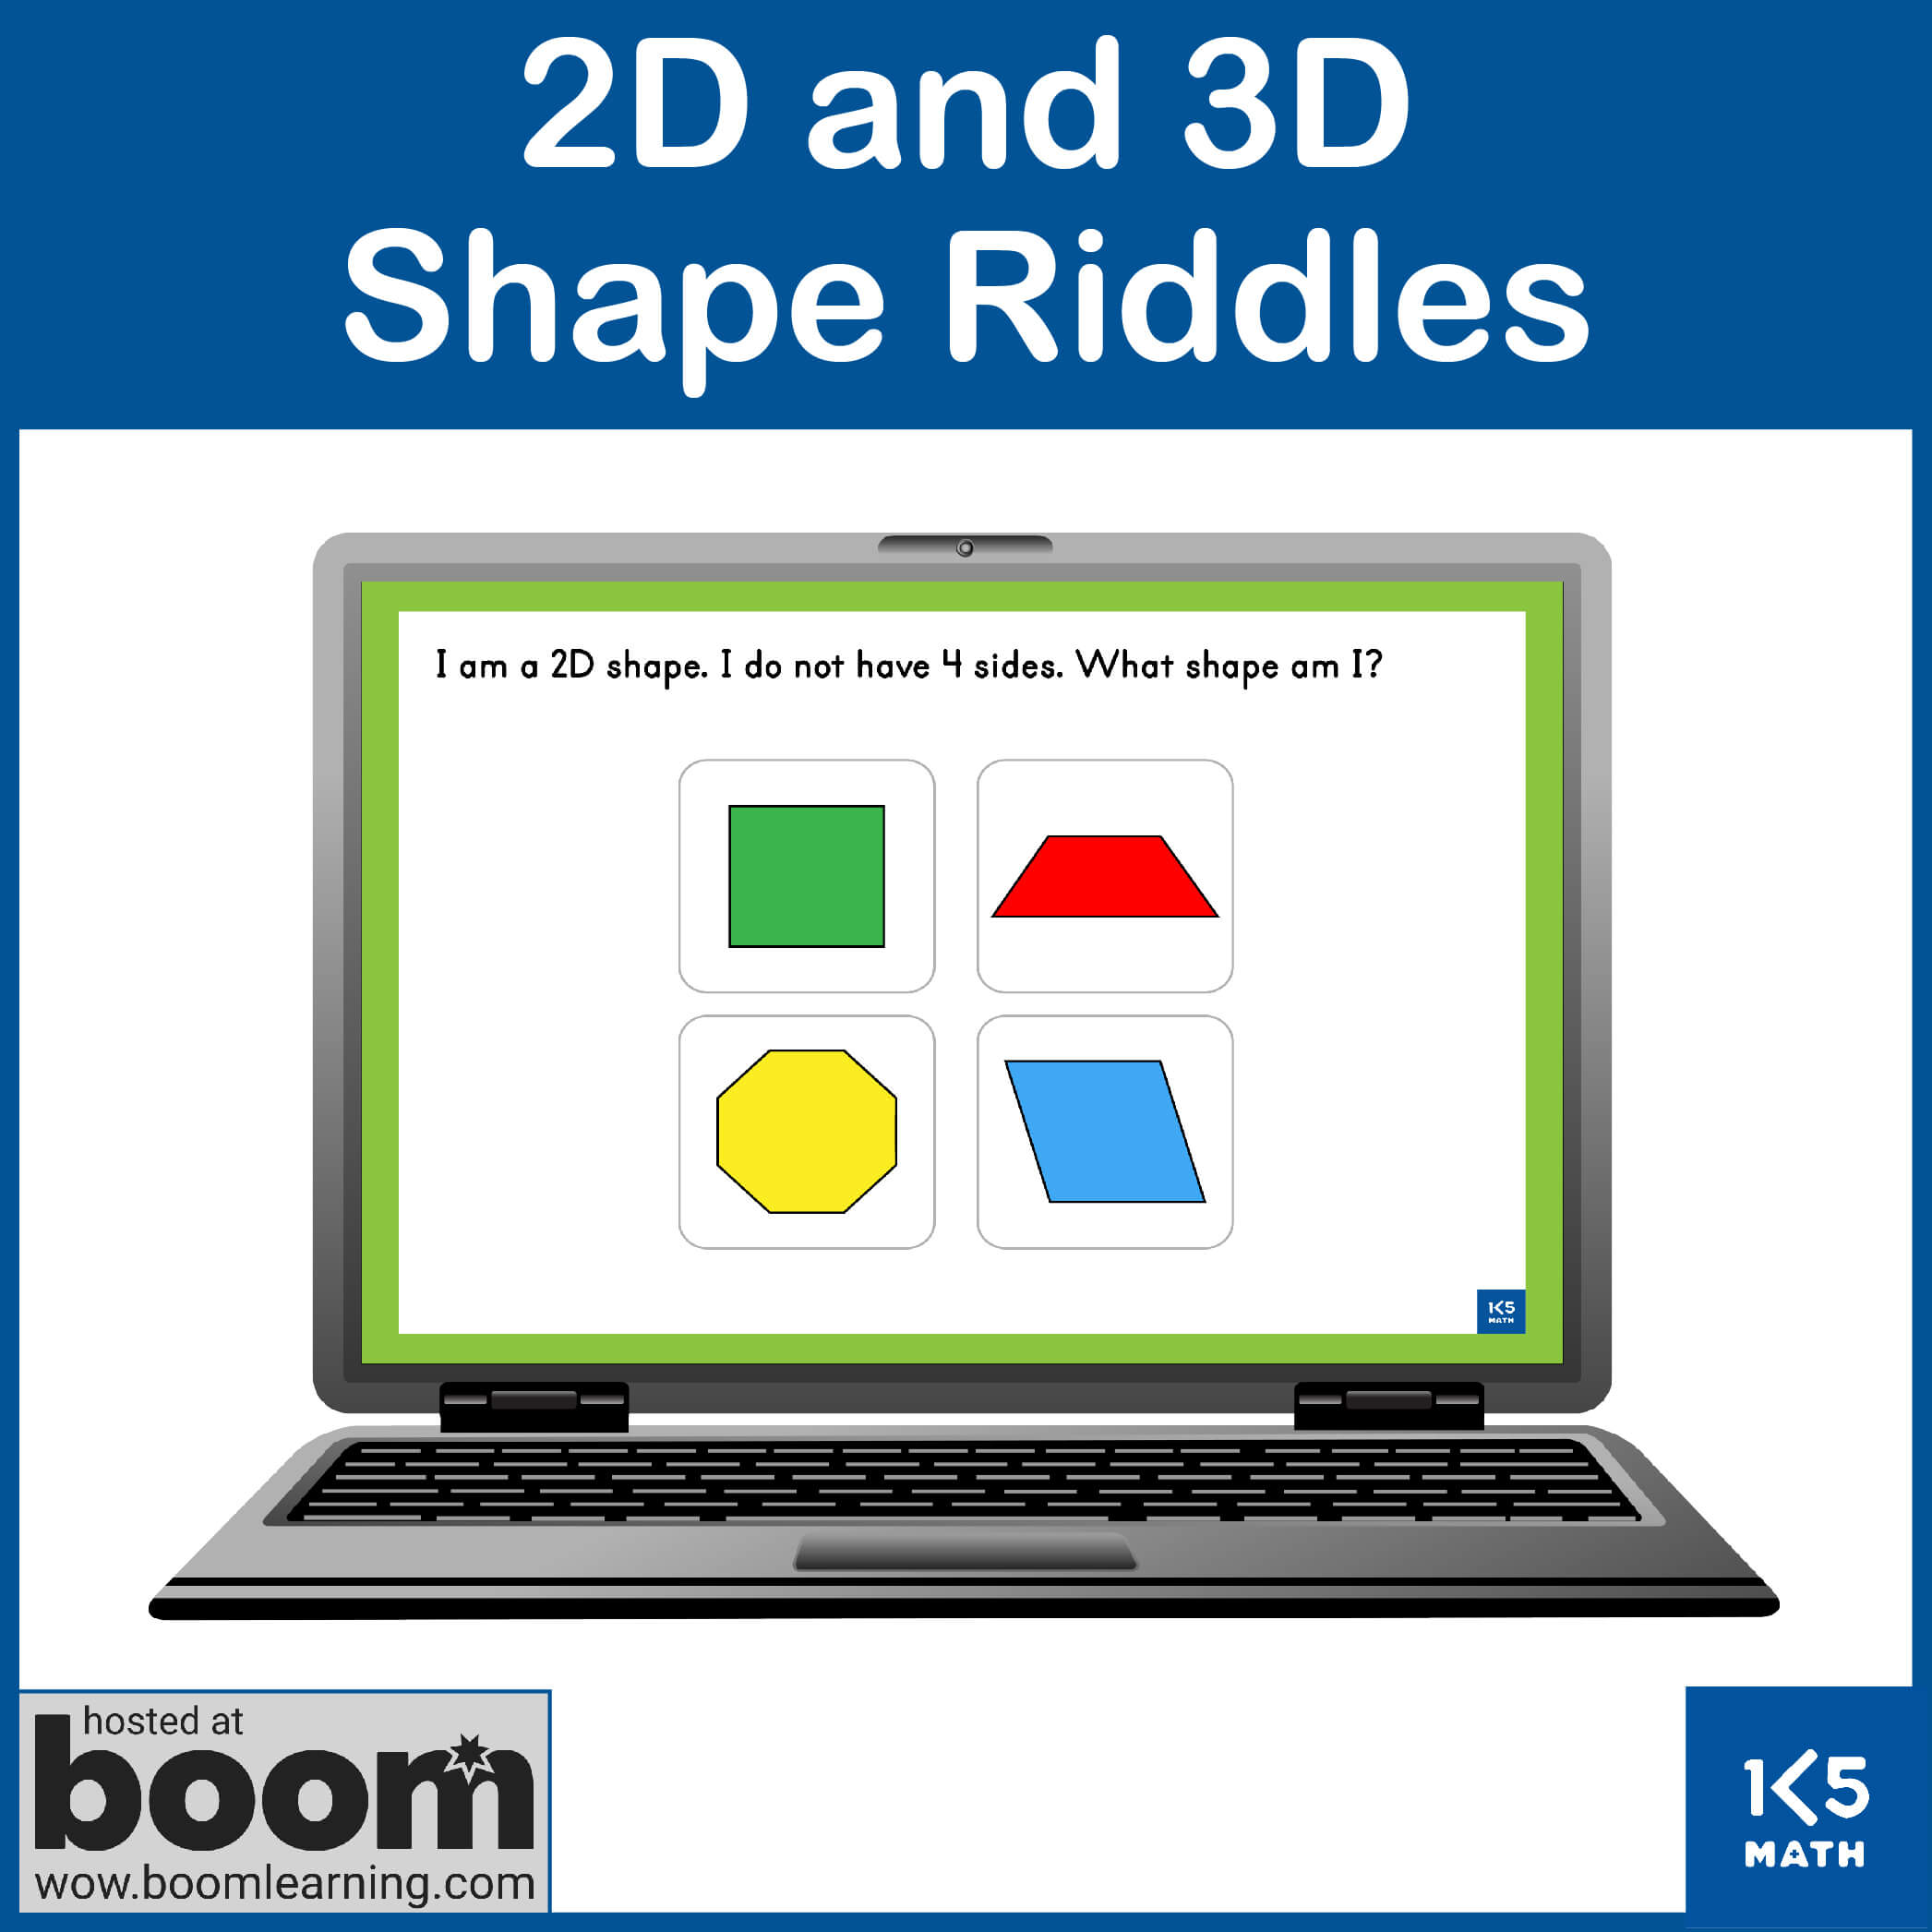 Boom Cards: 2D and 3D Shape Riddles